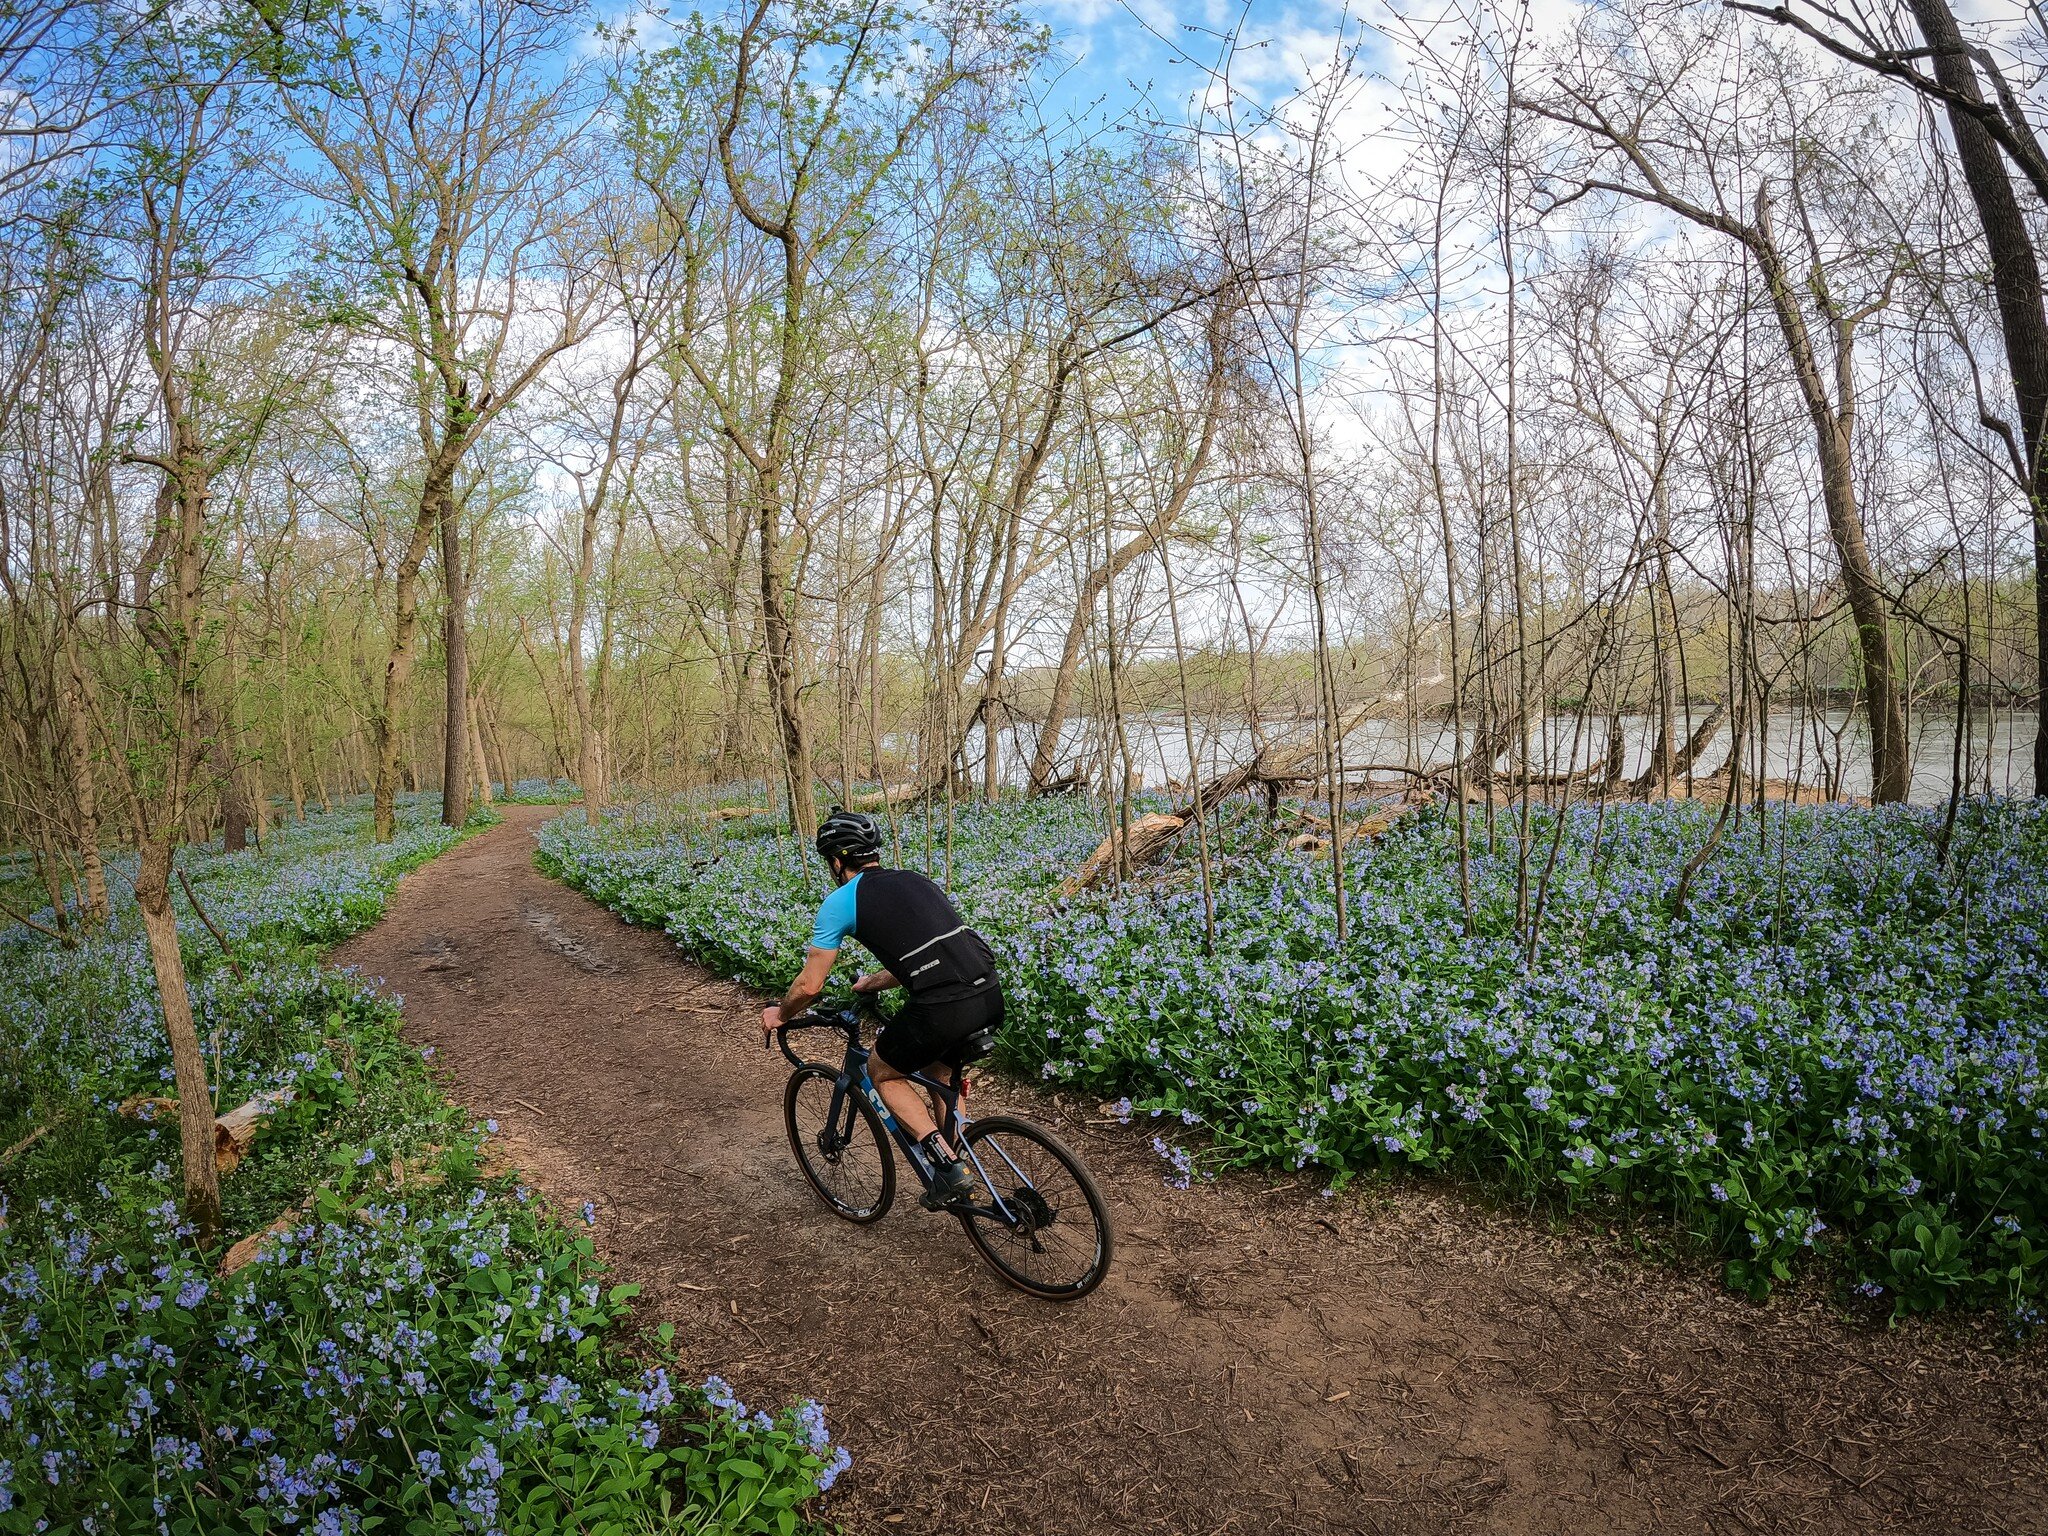 The Blue Highway! The bluebells are in full bloom right now at Riverbend park. Springtime at its best! 

#MountainRoad #MountainRoadRide #LivePlayBloomThrive #Springtime #PotomacRiver #Bluebells #SeaOfFlowers #RiverbendPark @fairfaxcounty